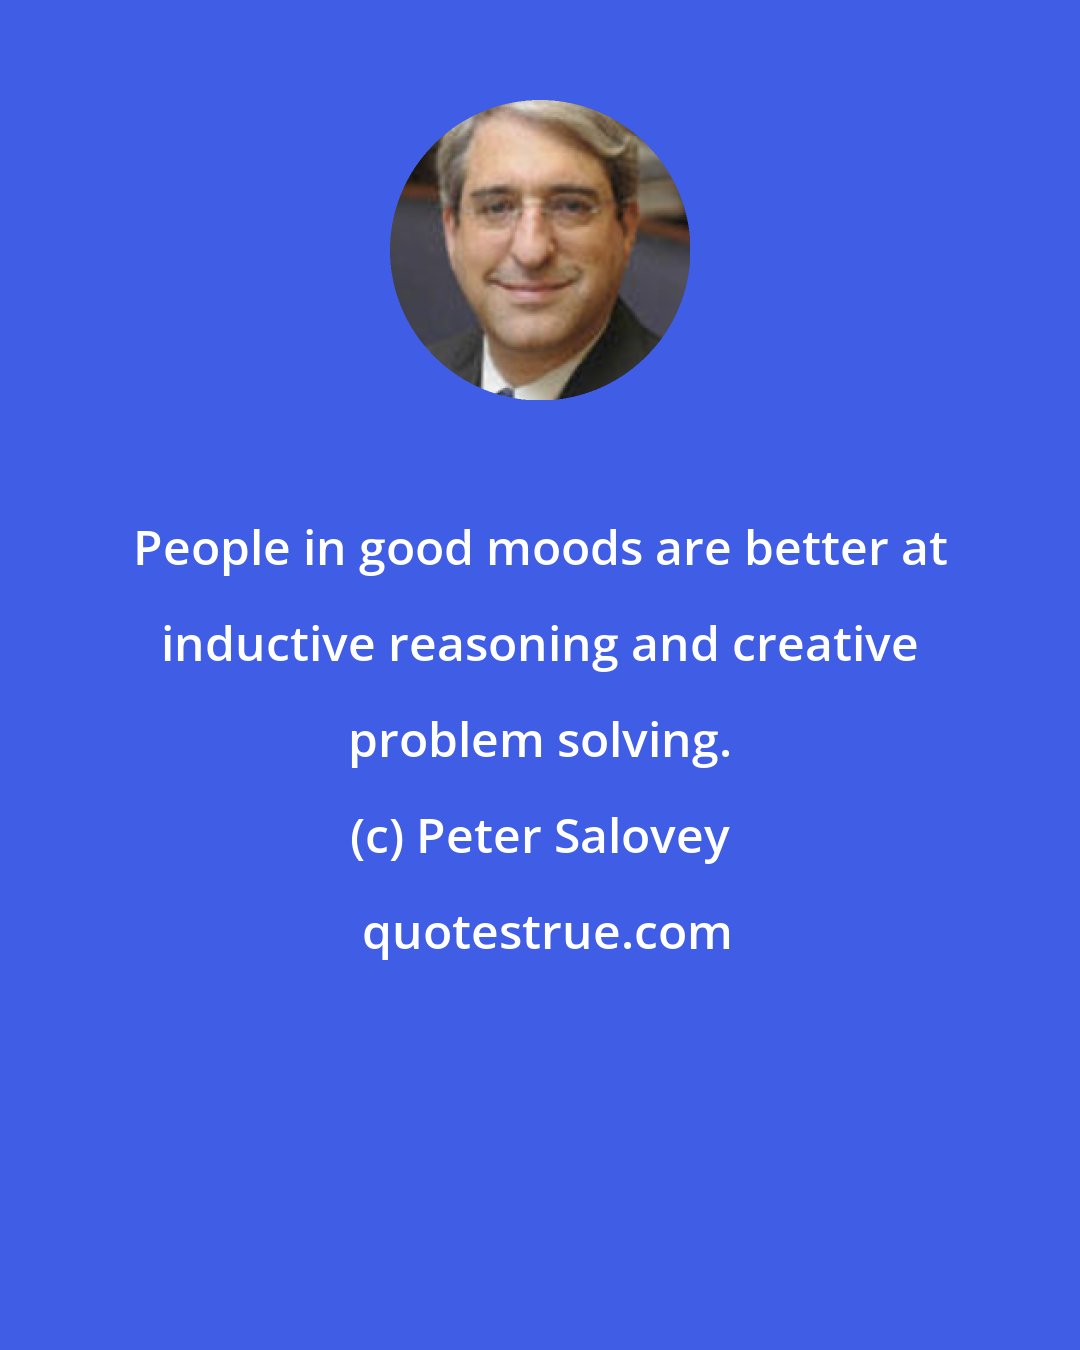 Peter Salovey: People in good moods are better at inductive reasoning and creative problem solving.